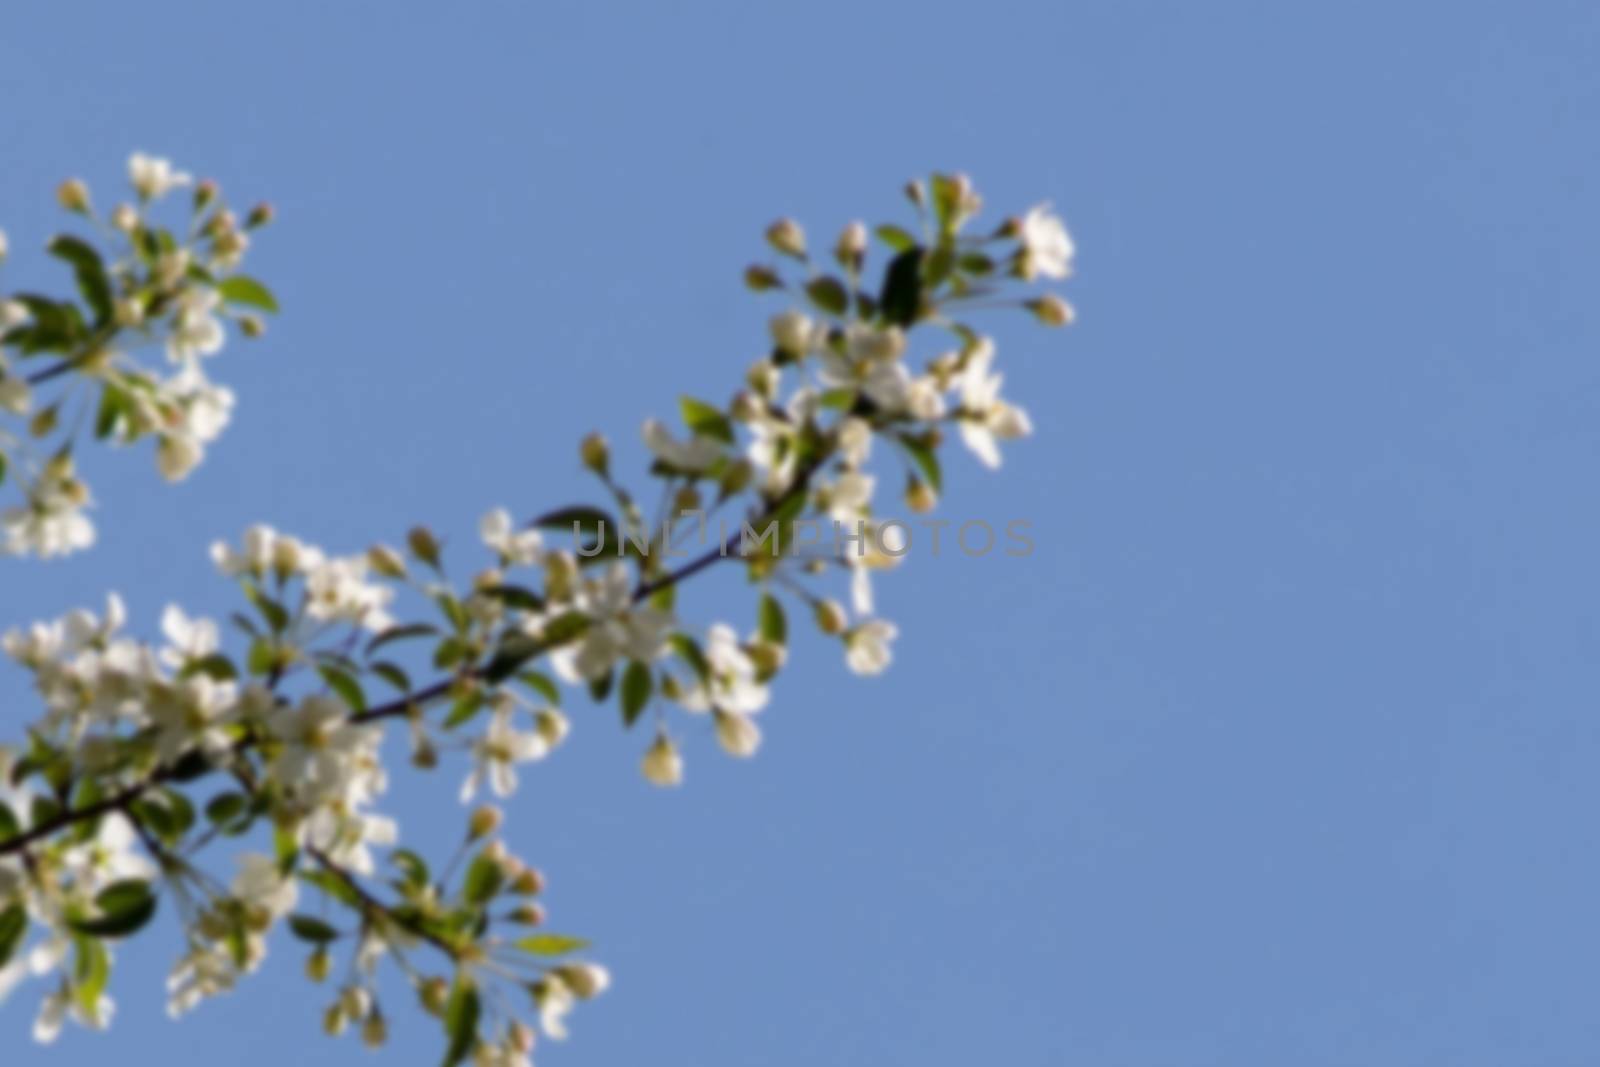 Background of Apple tree branches with white flowers by bonilook